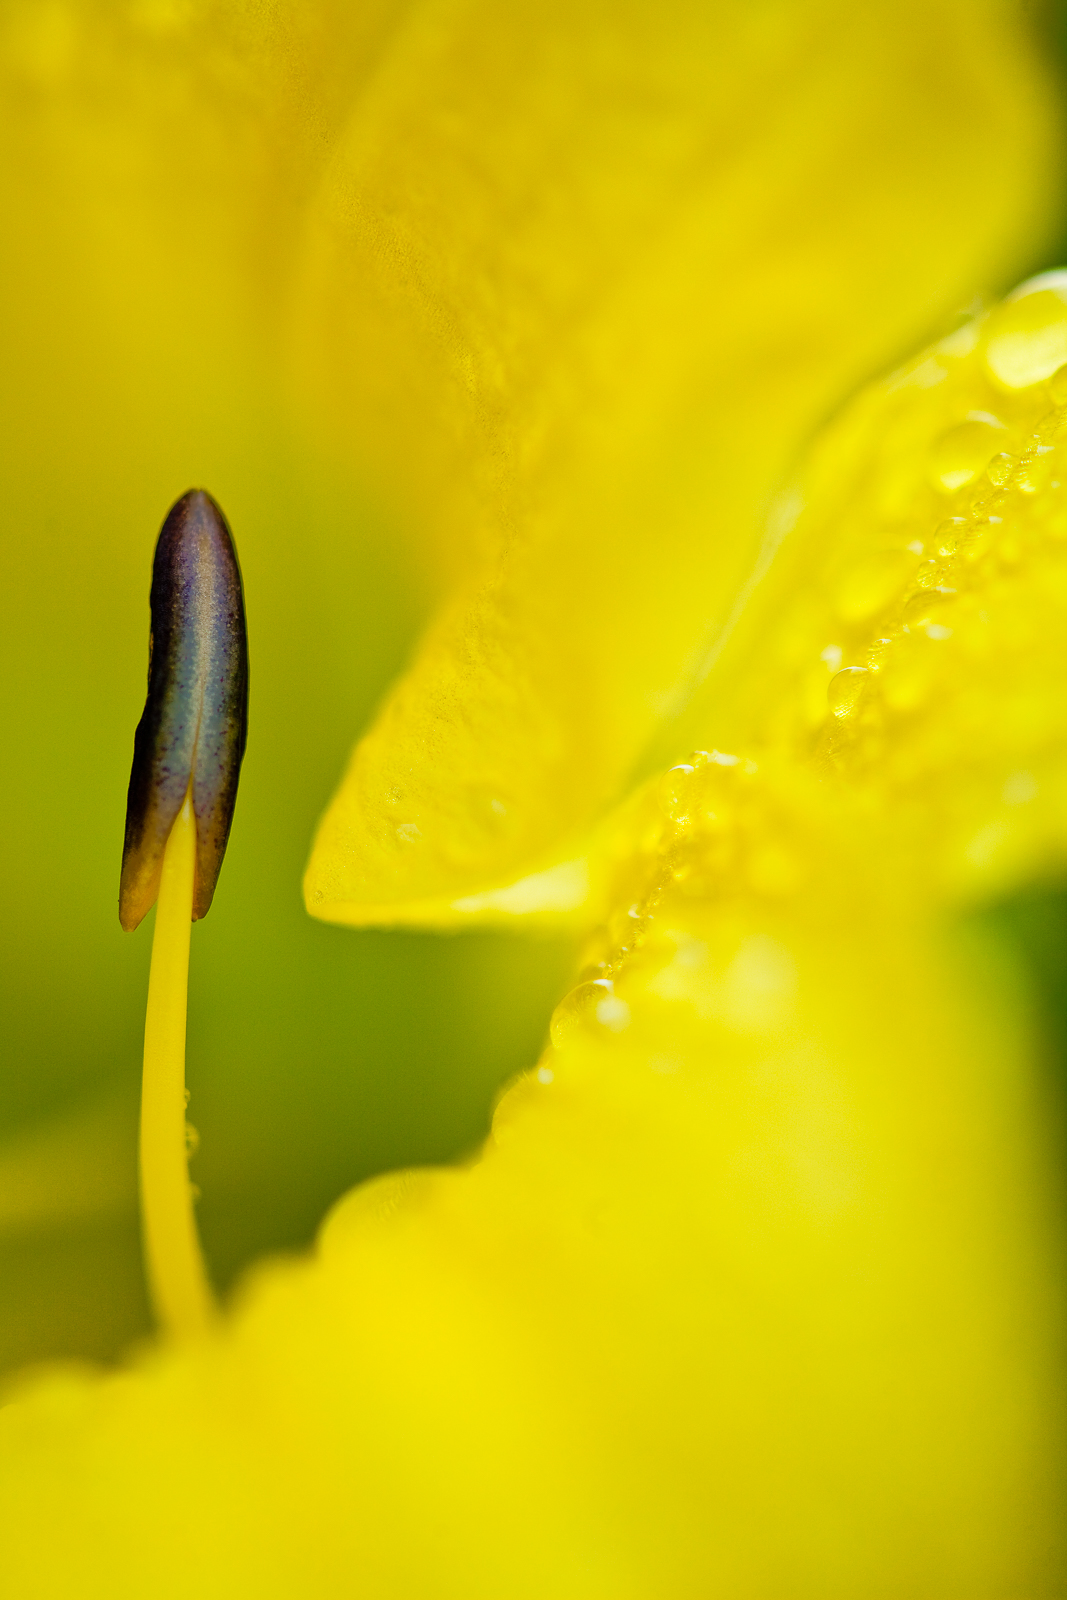 A close-up of the yellow world.   Mother nature's little gift to us.